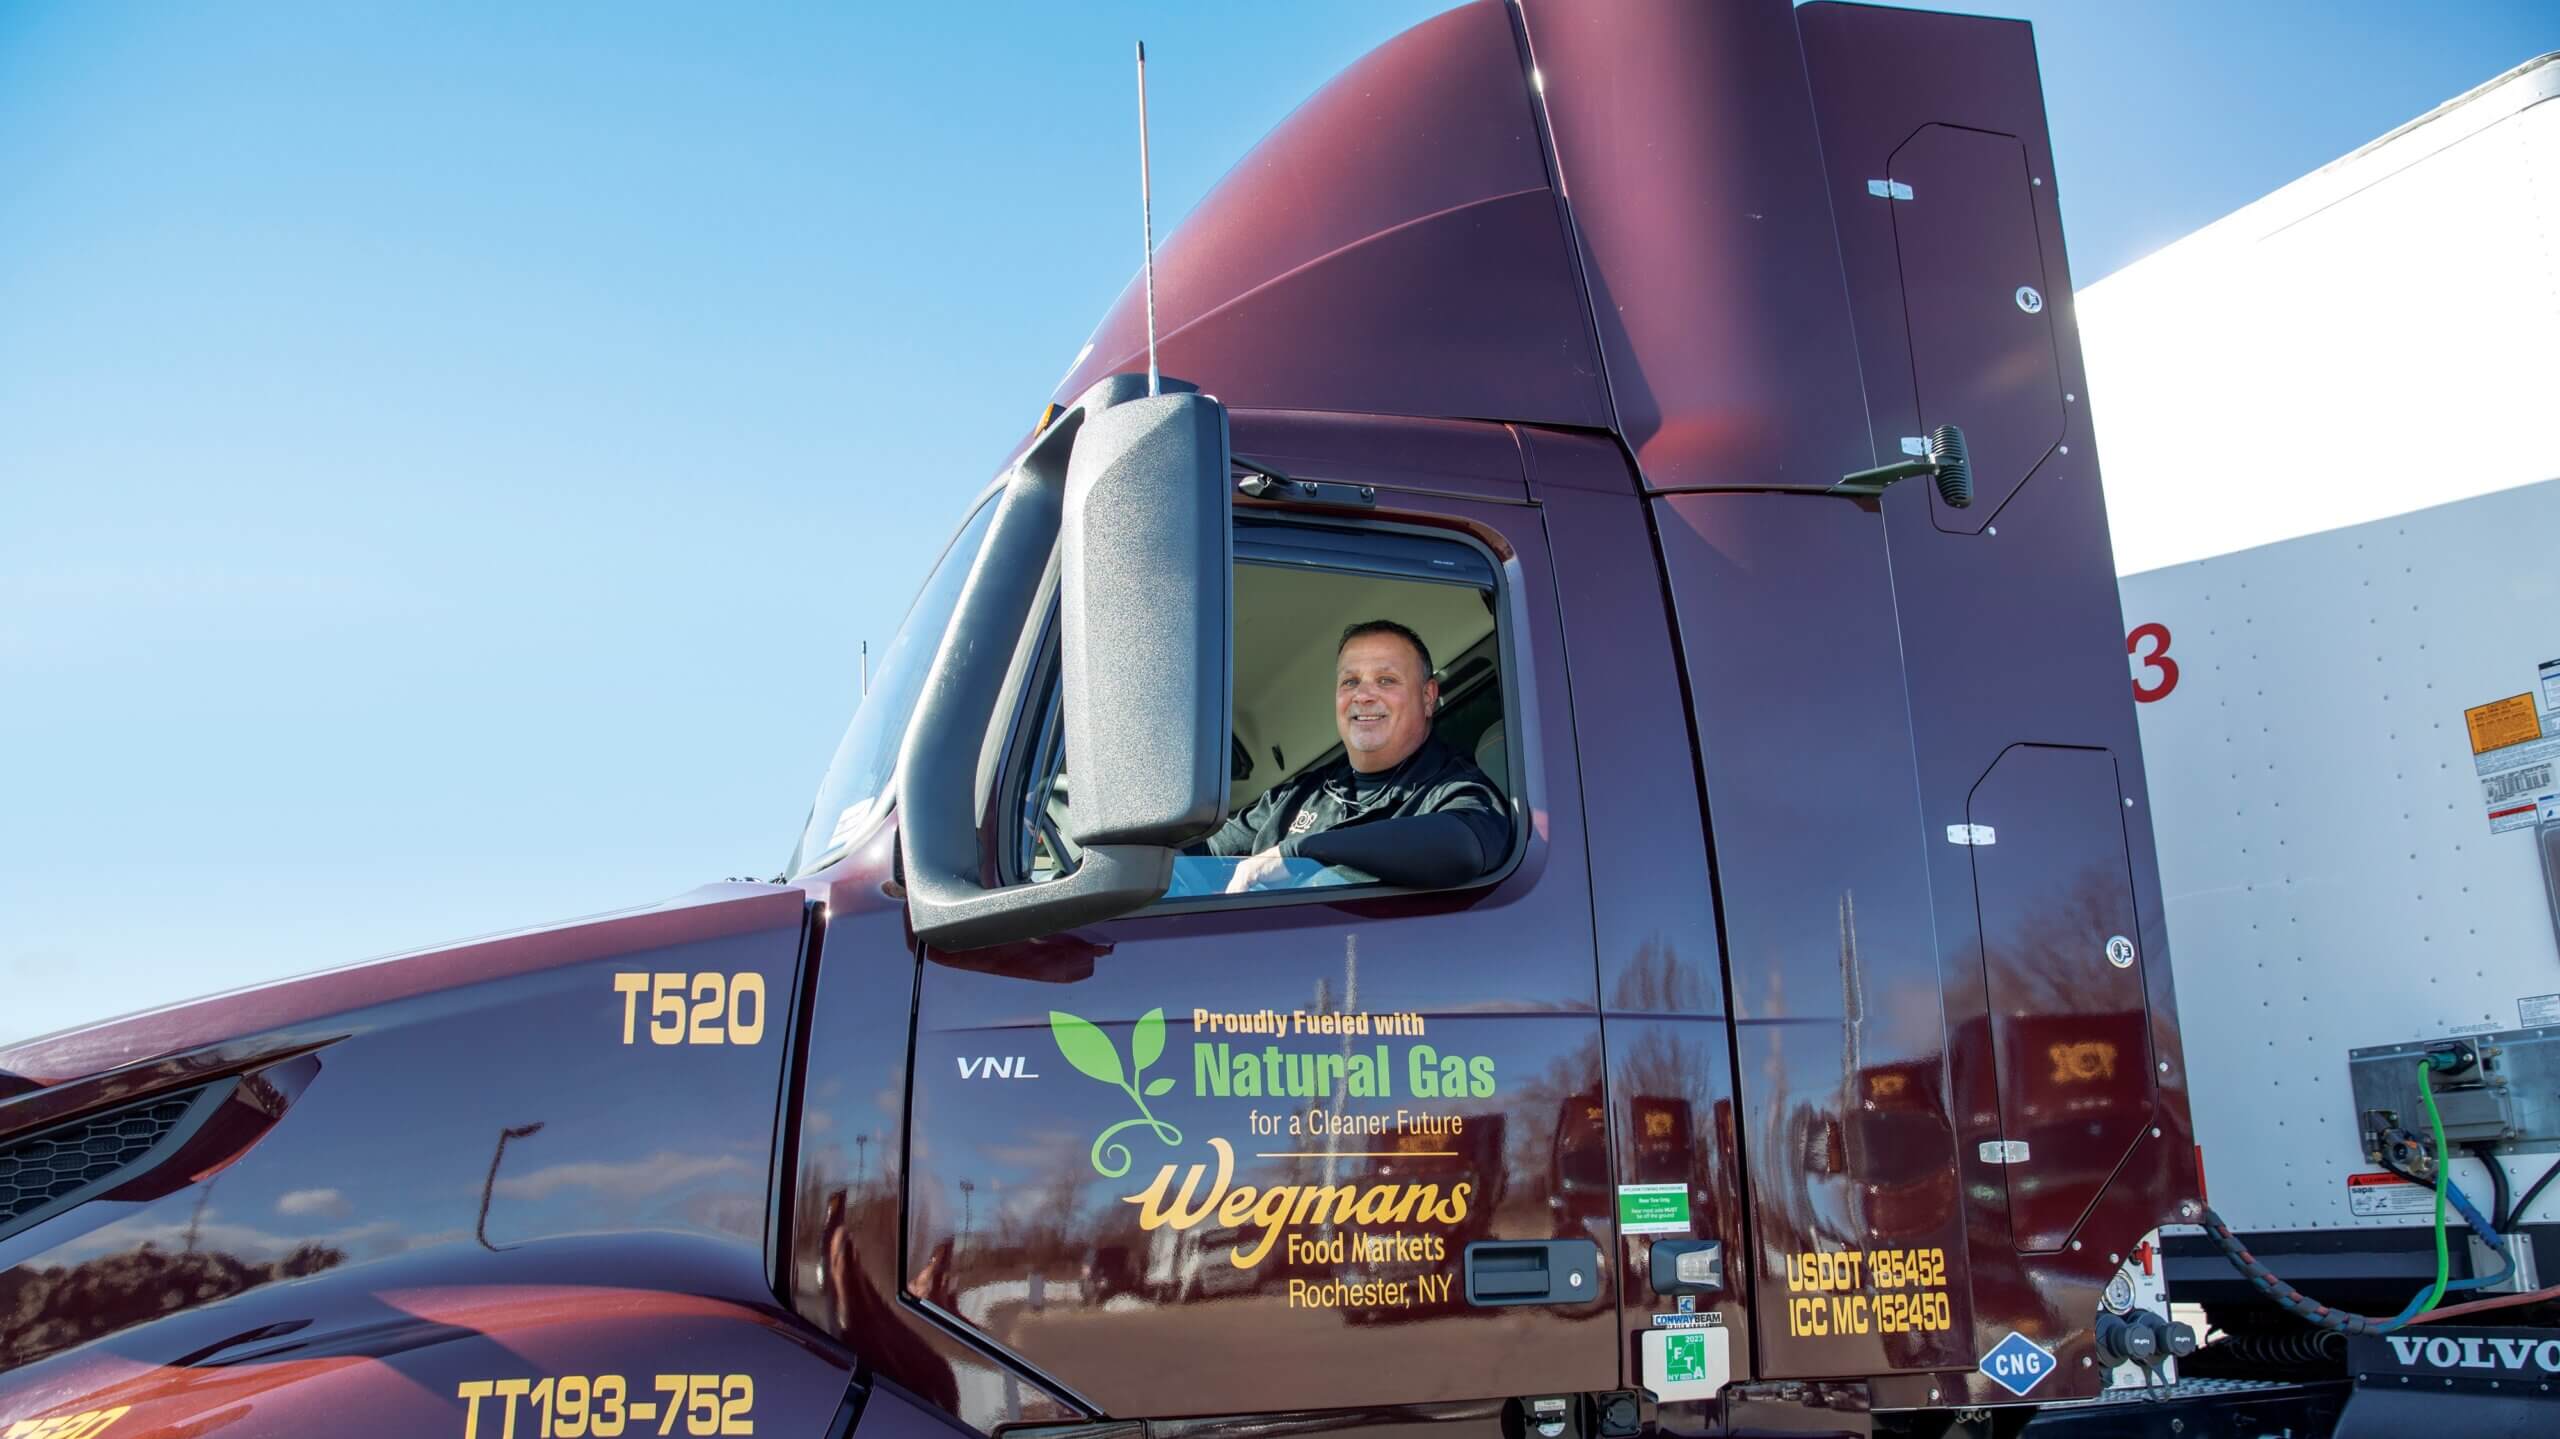 Wegmans Drivers Discuss Sustainability, Safety, and Comfort